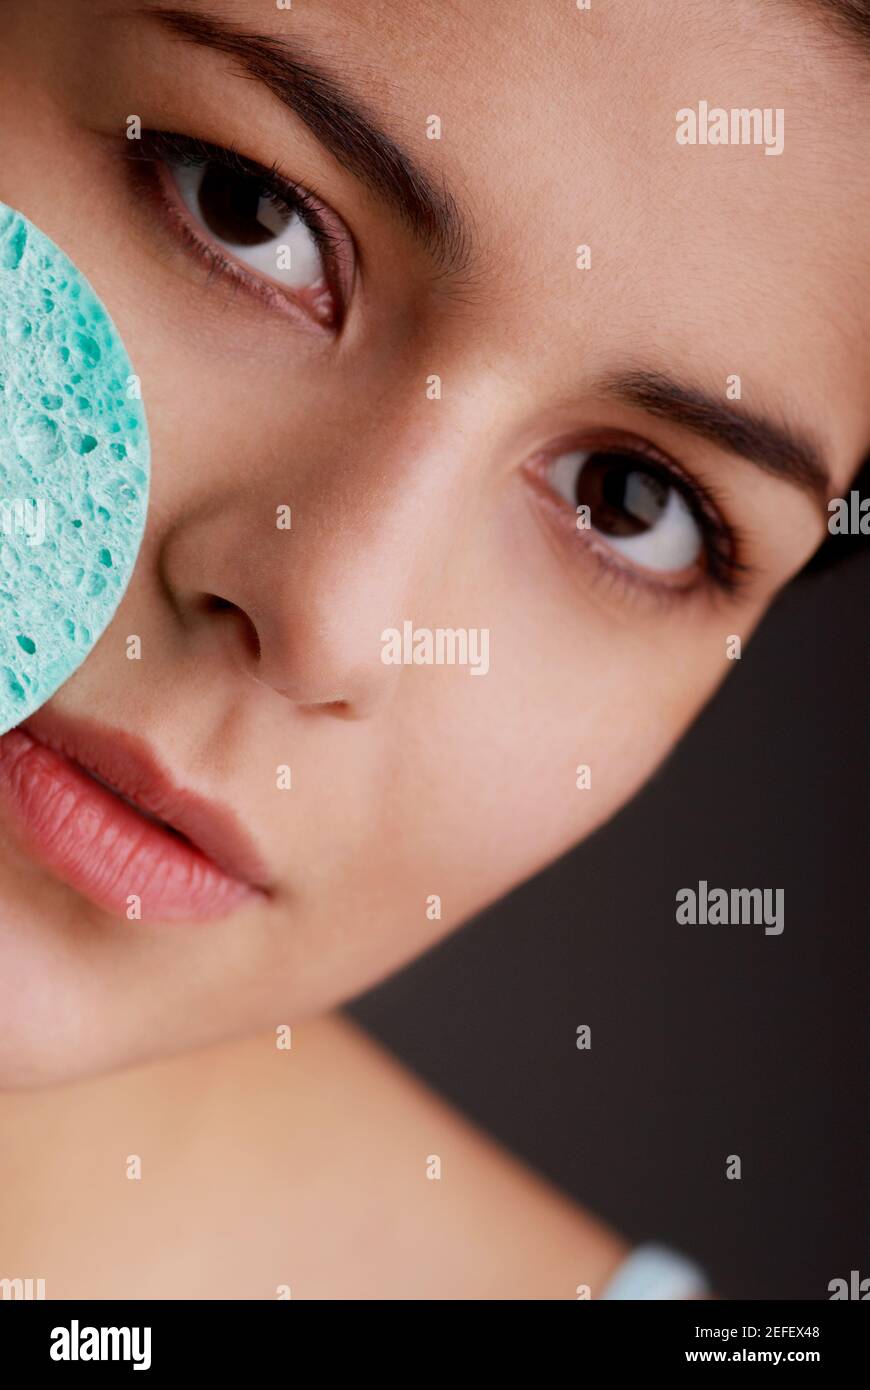 Portrait of a young woman scrubbing her face with a sponge Stock Photo